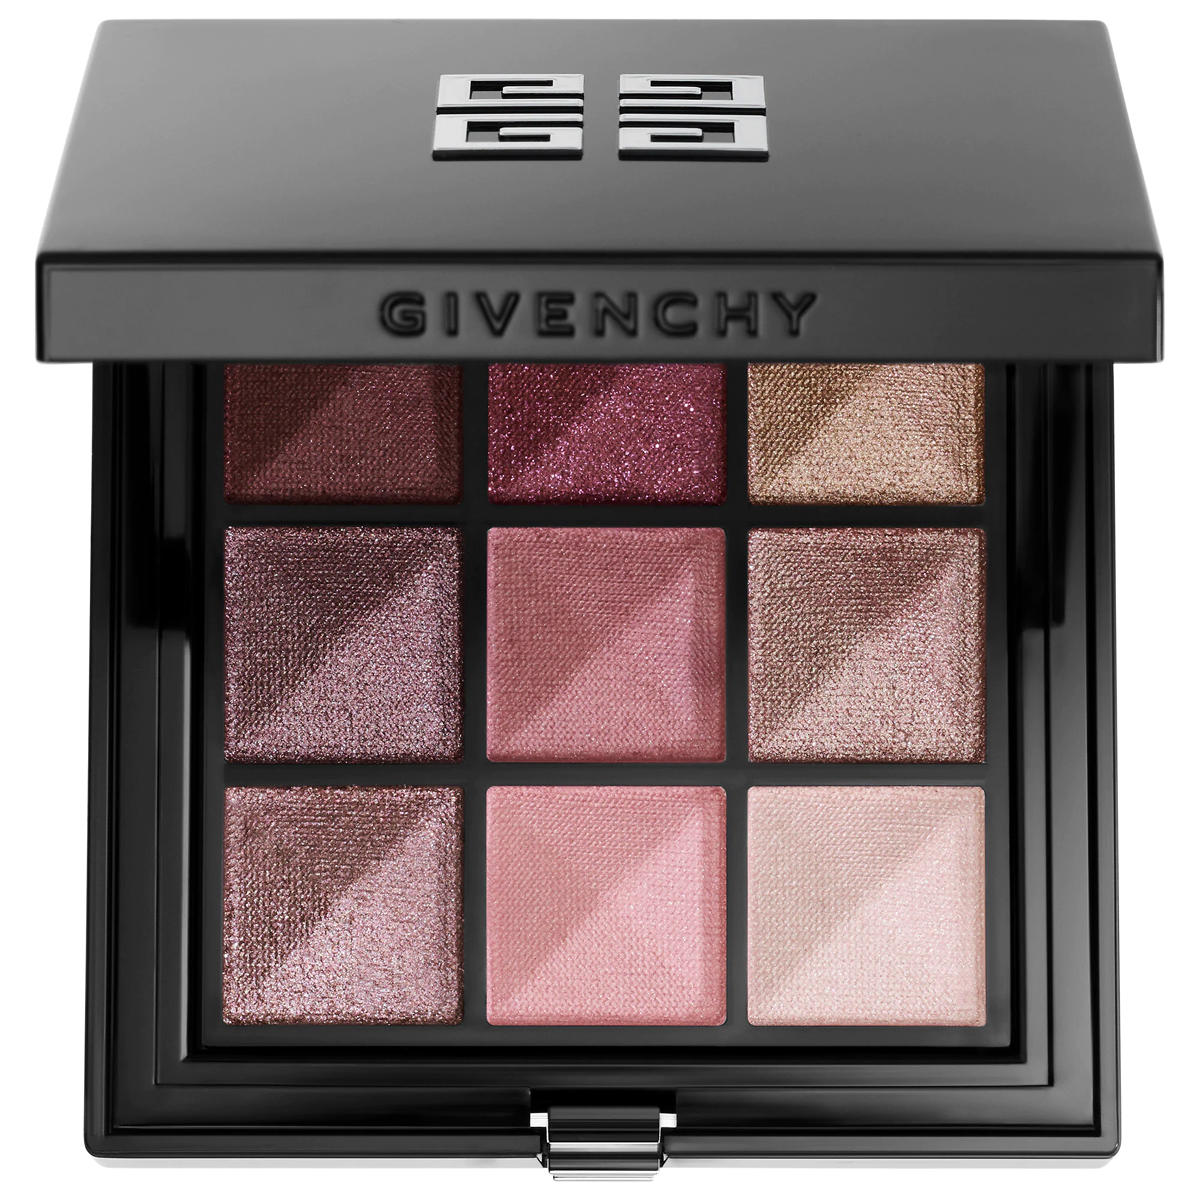 Givenchy Le Prismissime Eyeshadow Palette Essence Of Browns 02 |  Glambot.com - Best deals on Givenchy cosmetics